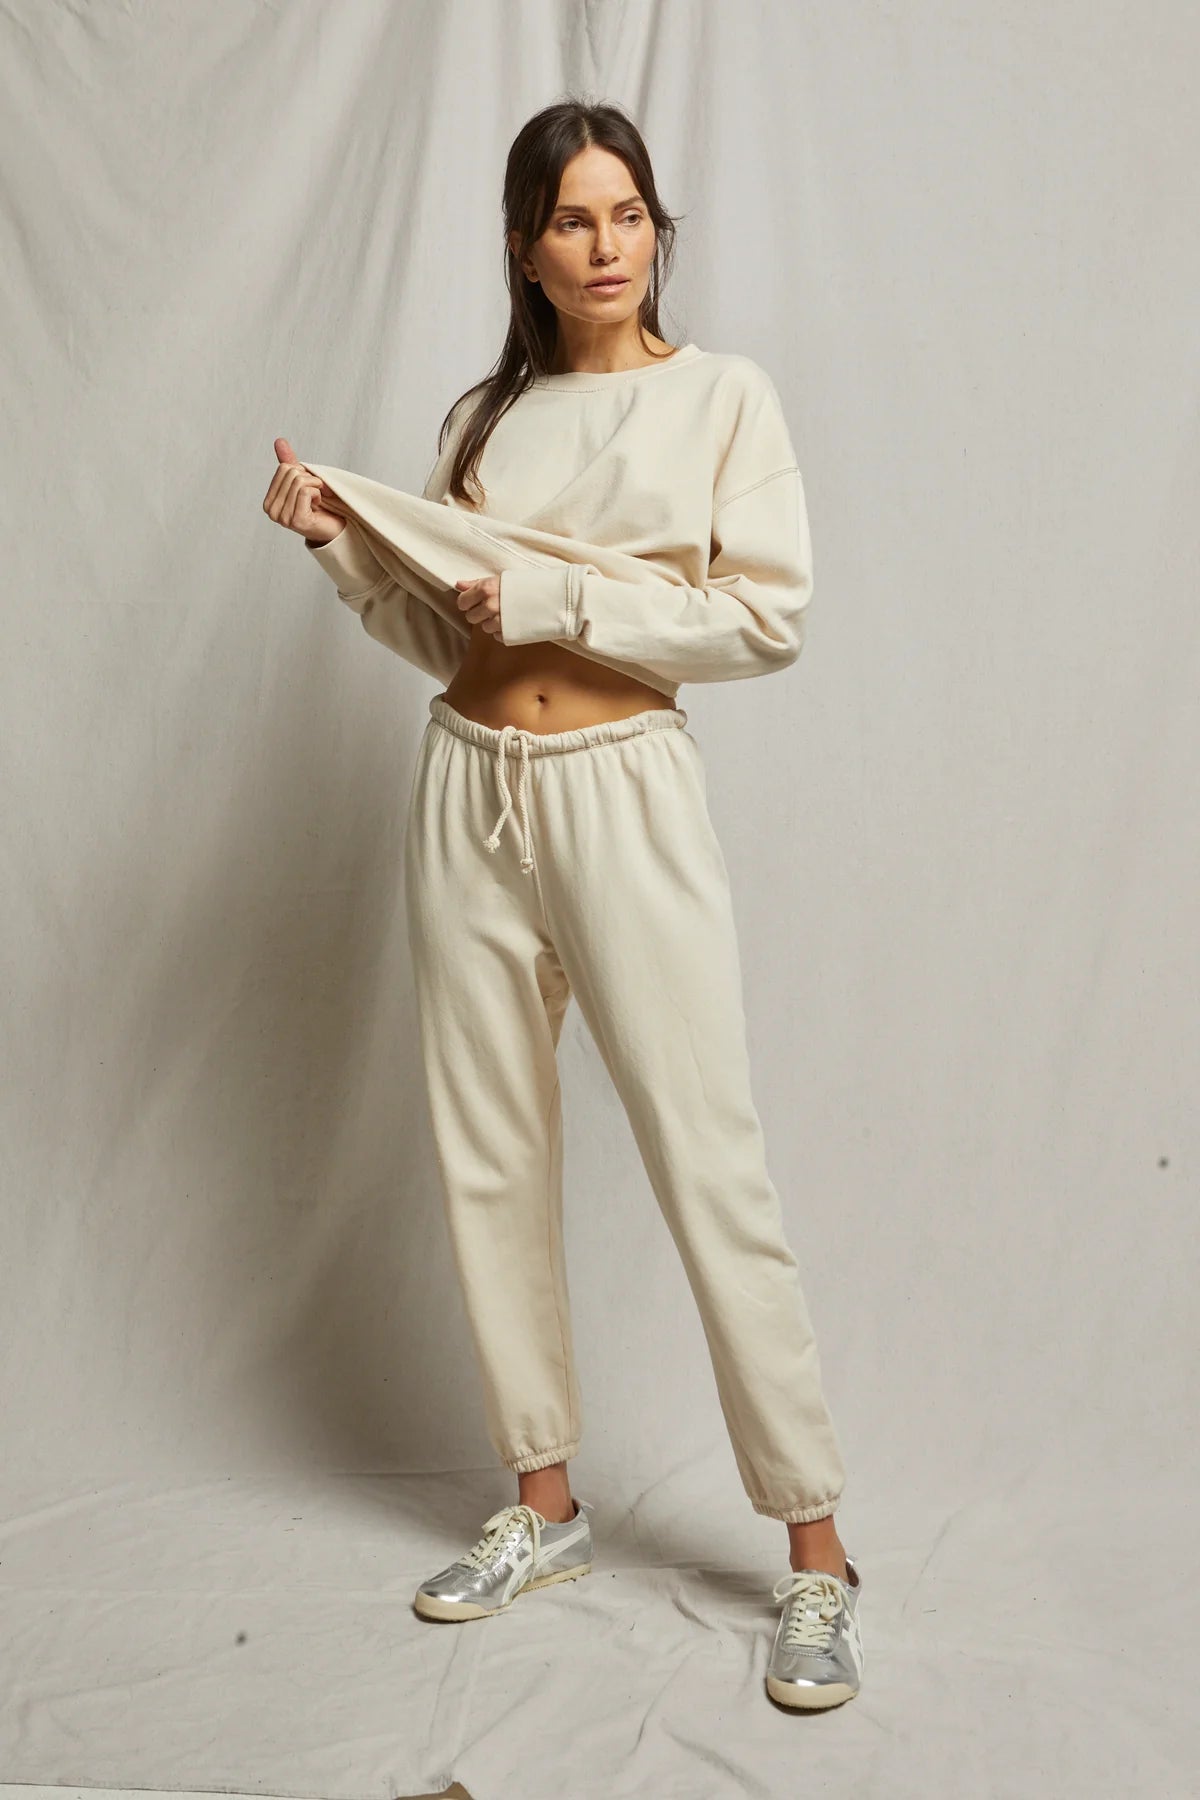 Perfect White Tee Johnny, Sweatpants, joggers, drawstring sweatpants, french terry cotton, sweats, women's clothing, lounge wear, casual